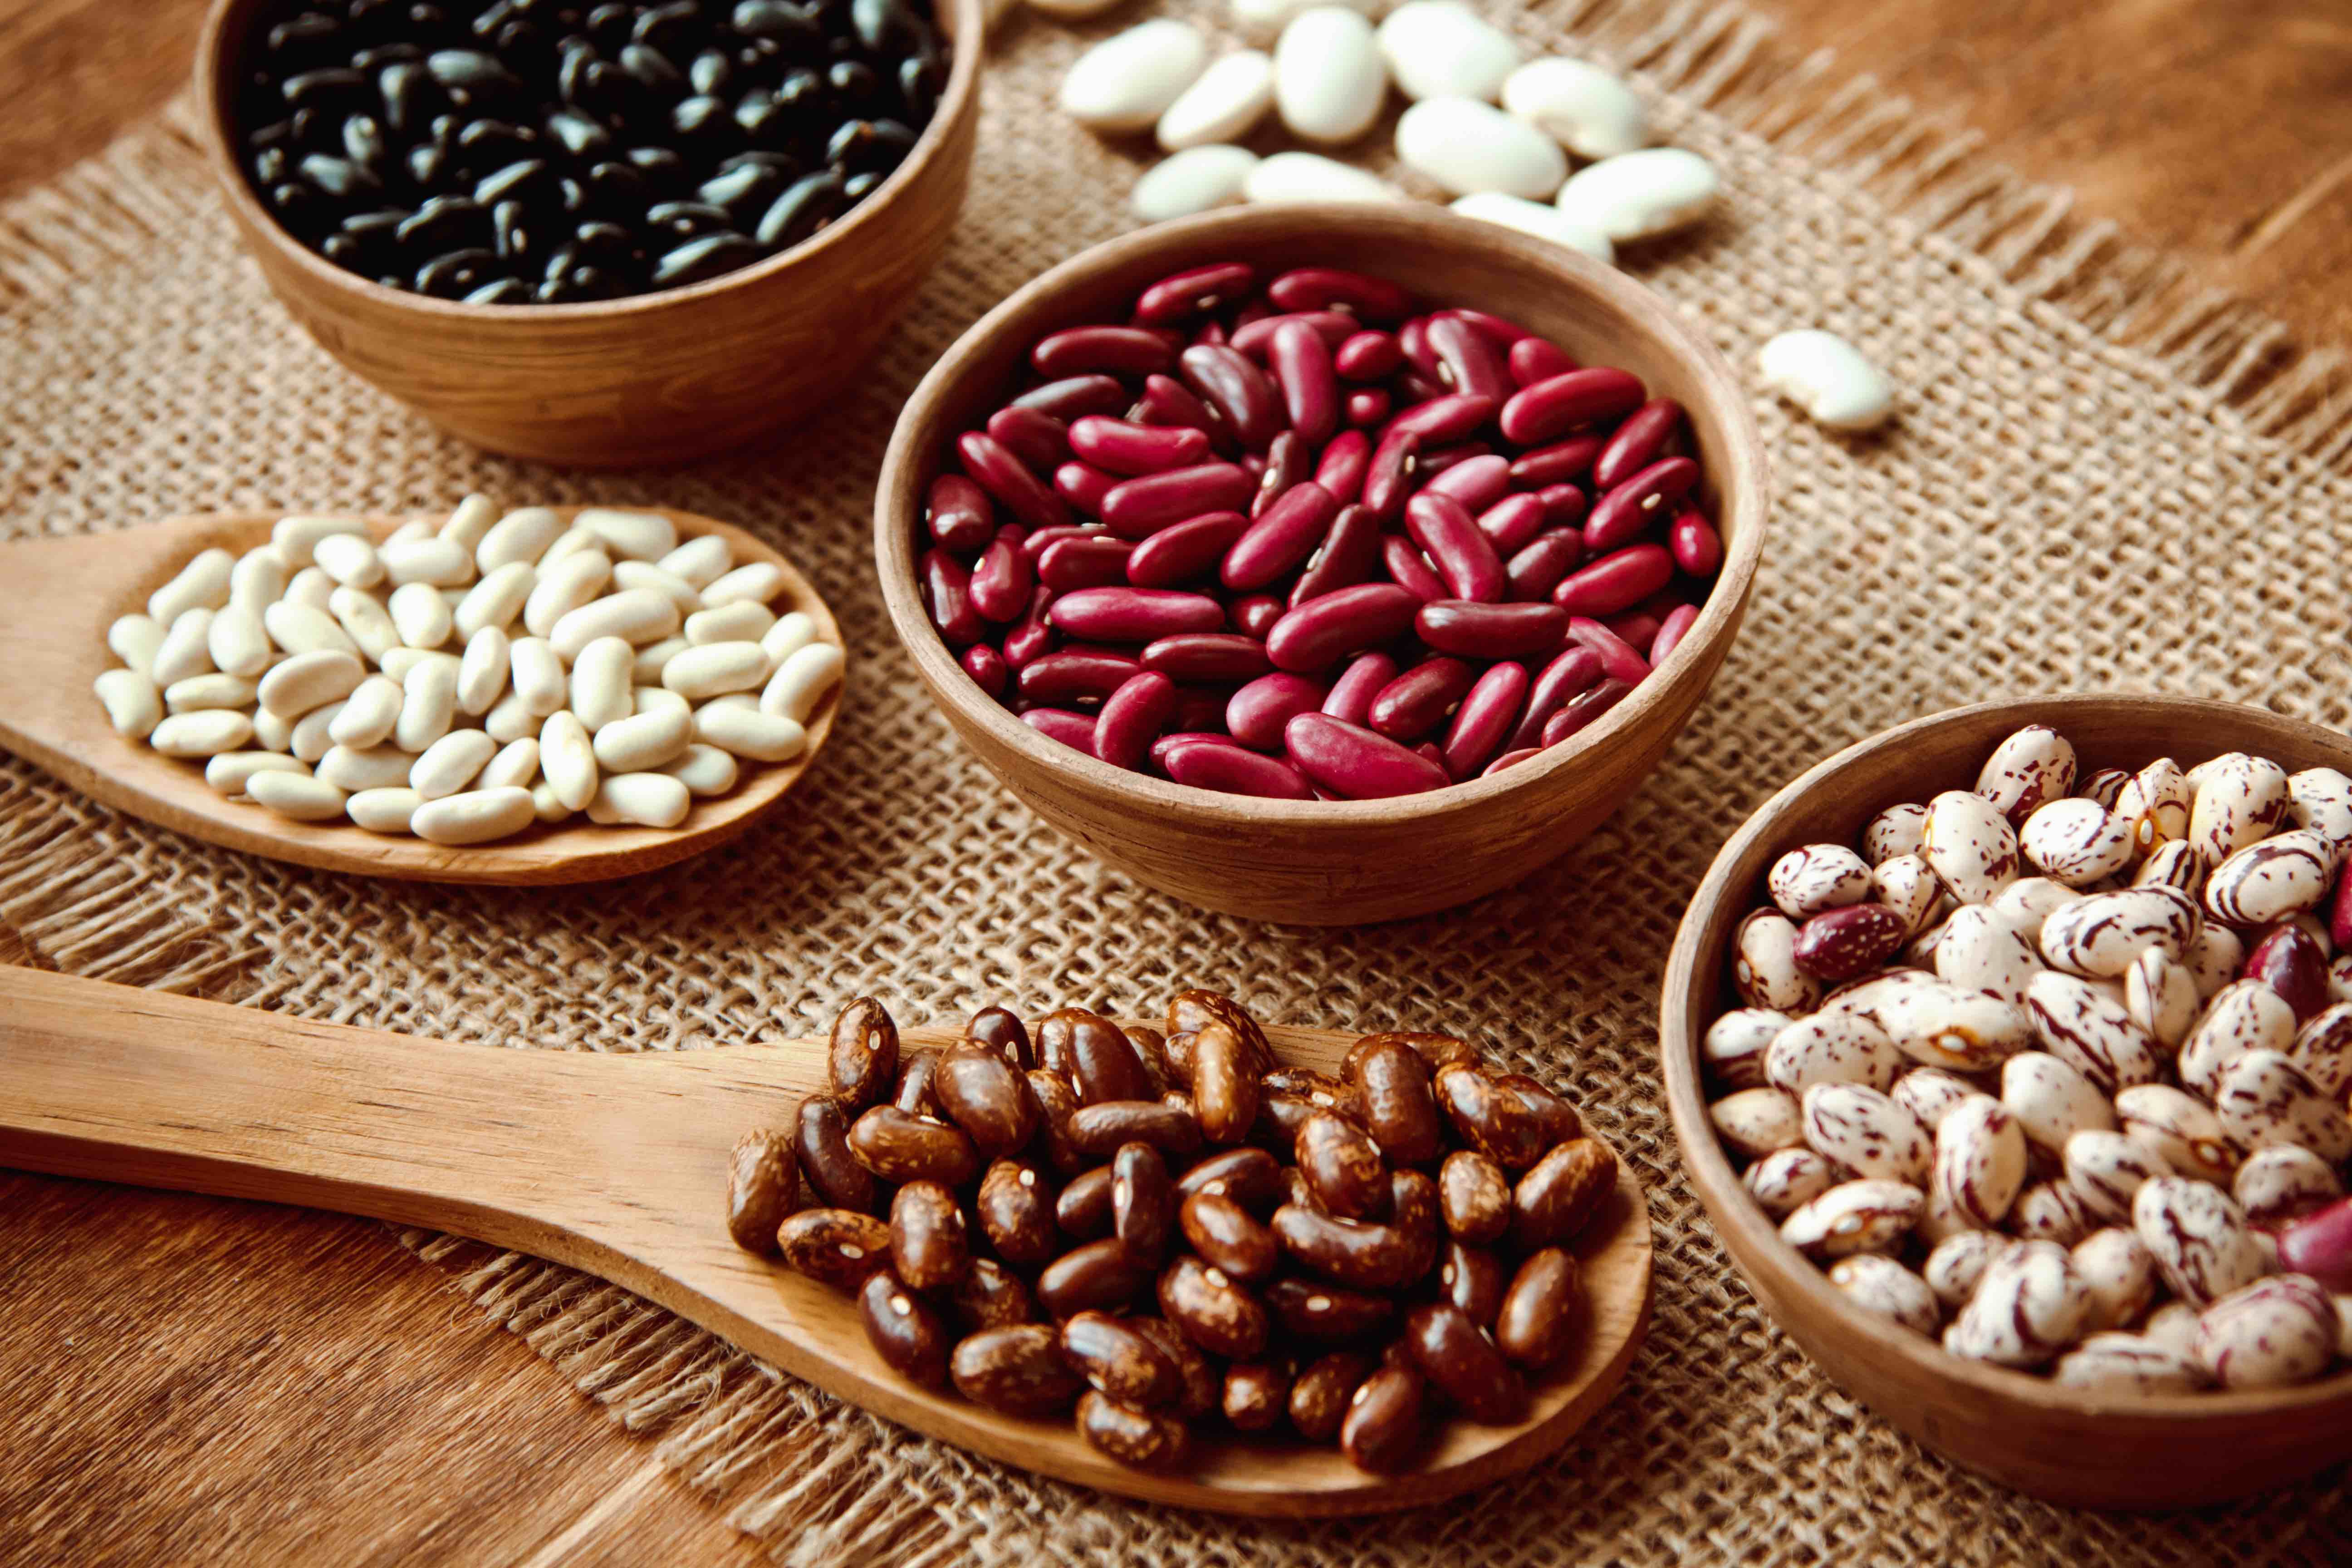 15 types of beans you may not have seen